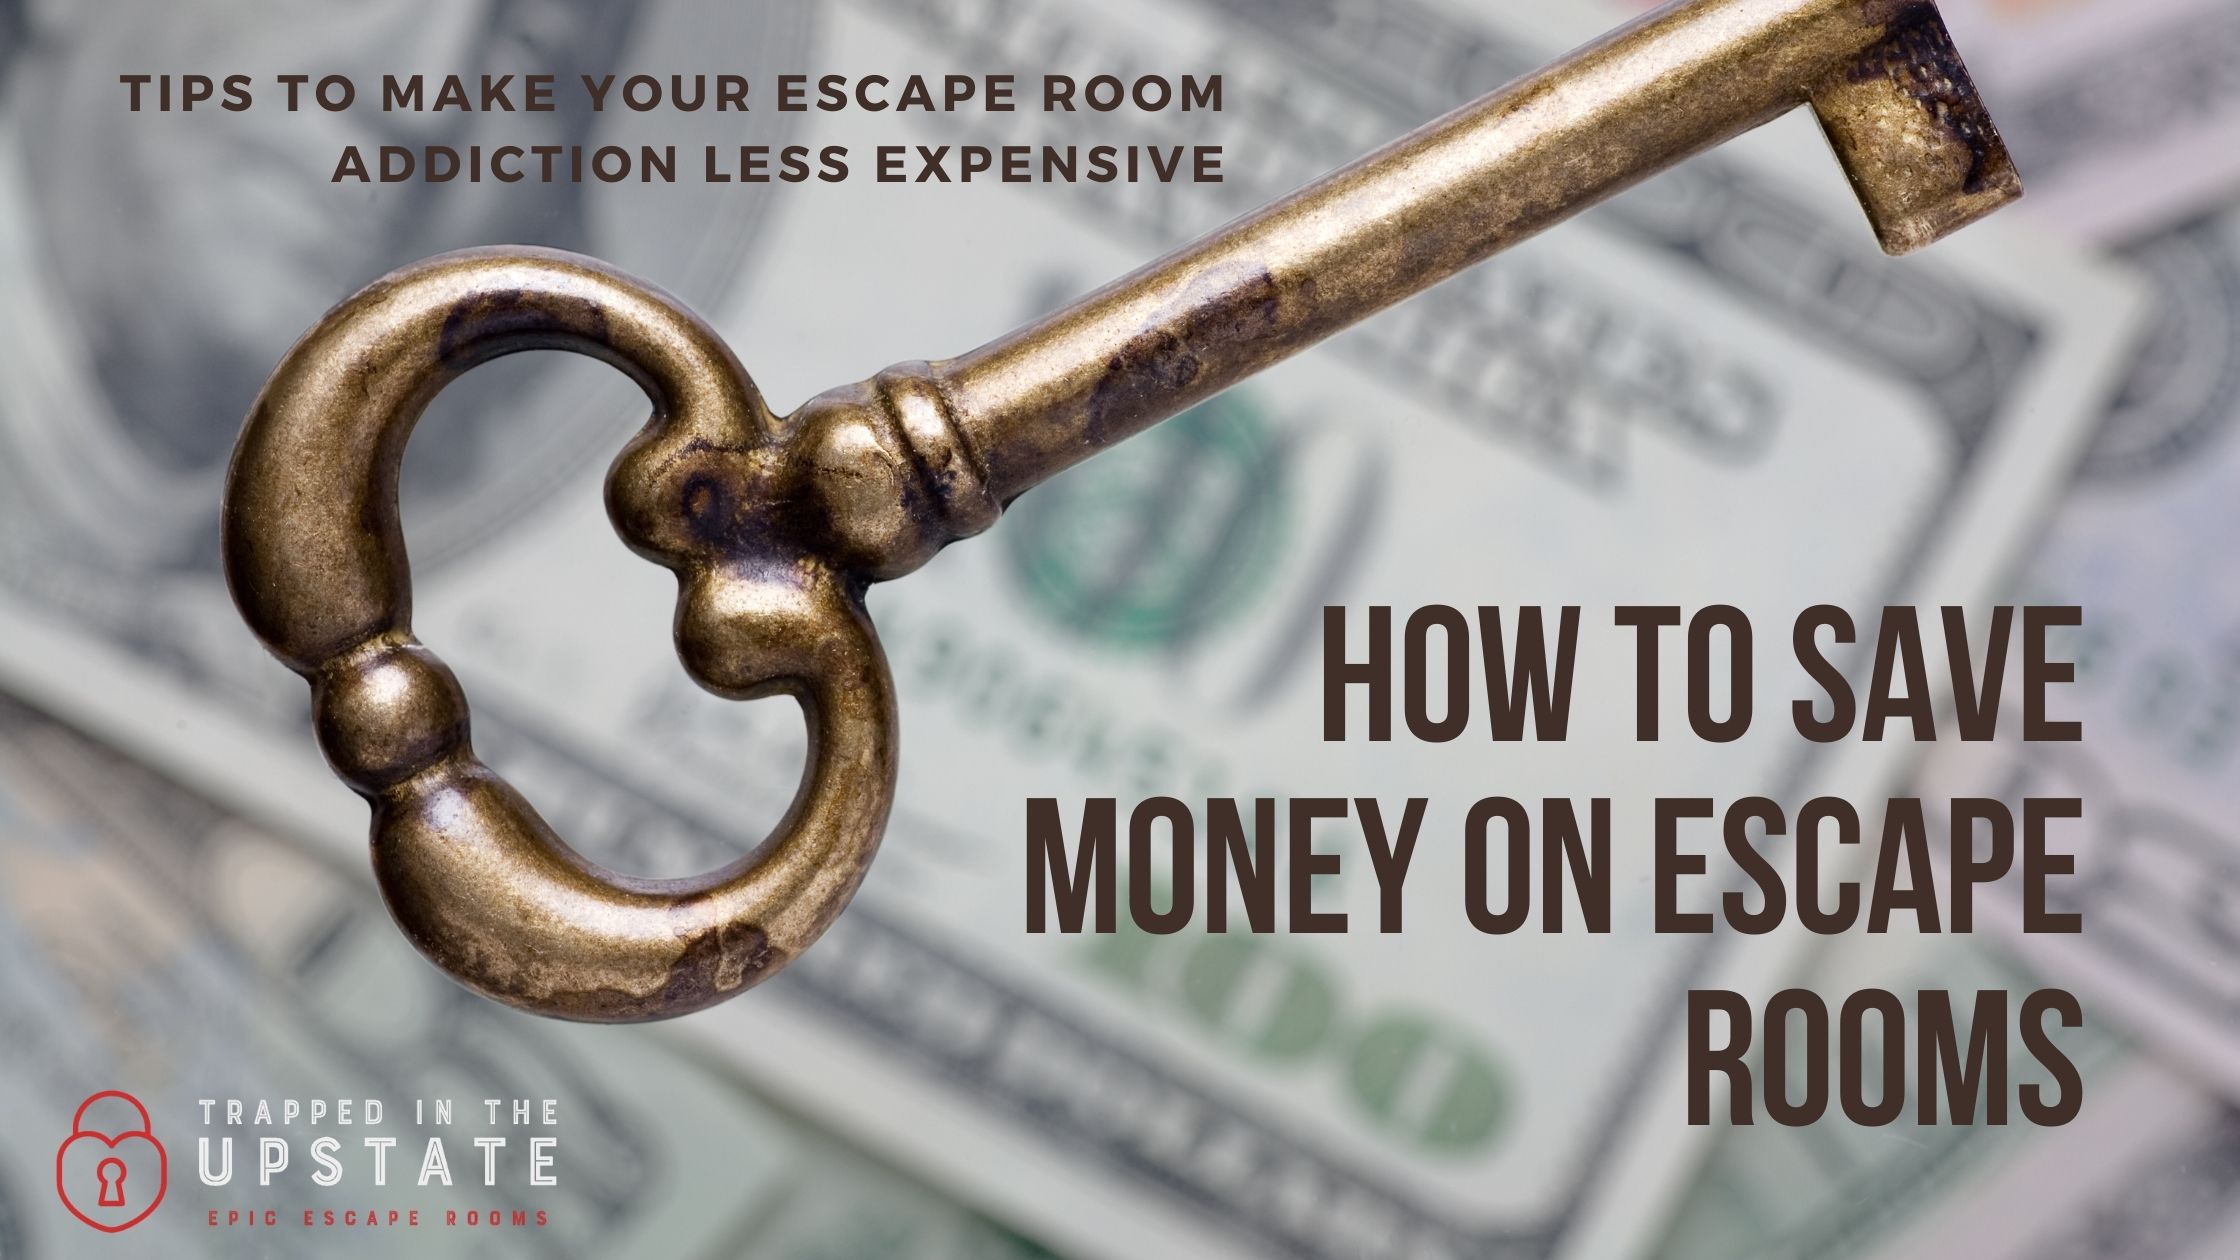 How to Save Money on Escape Rooms